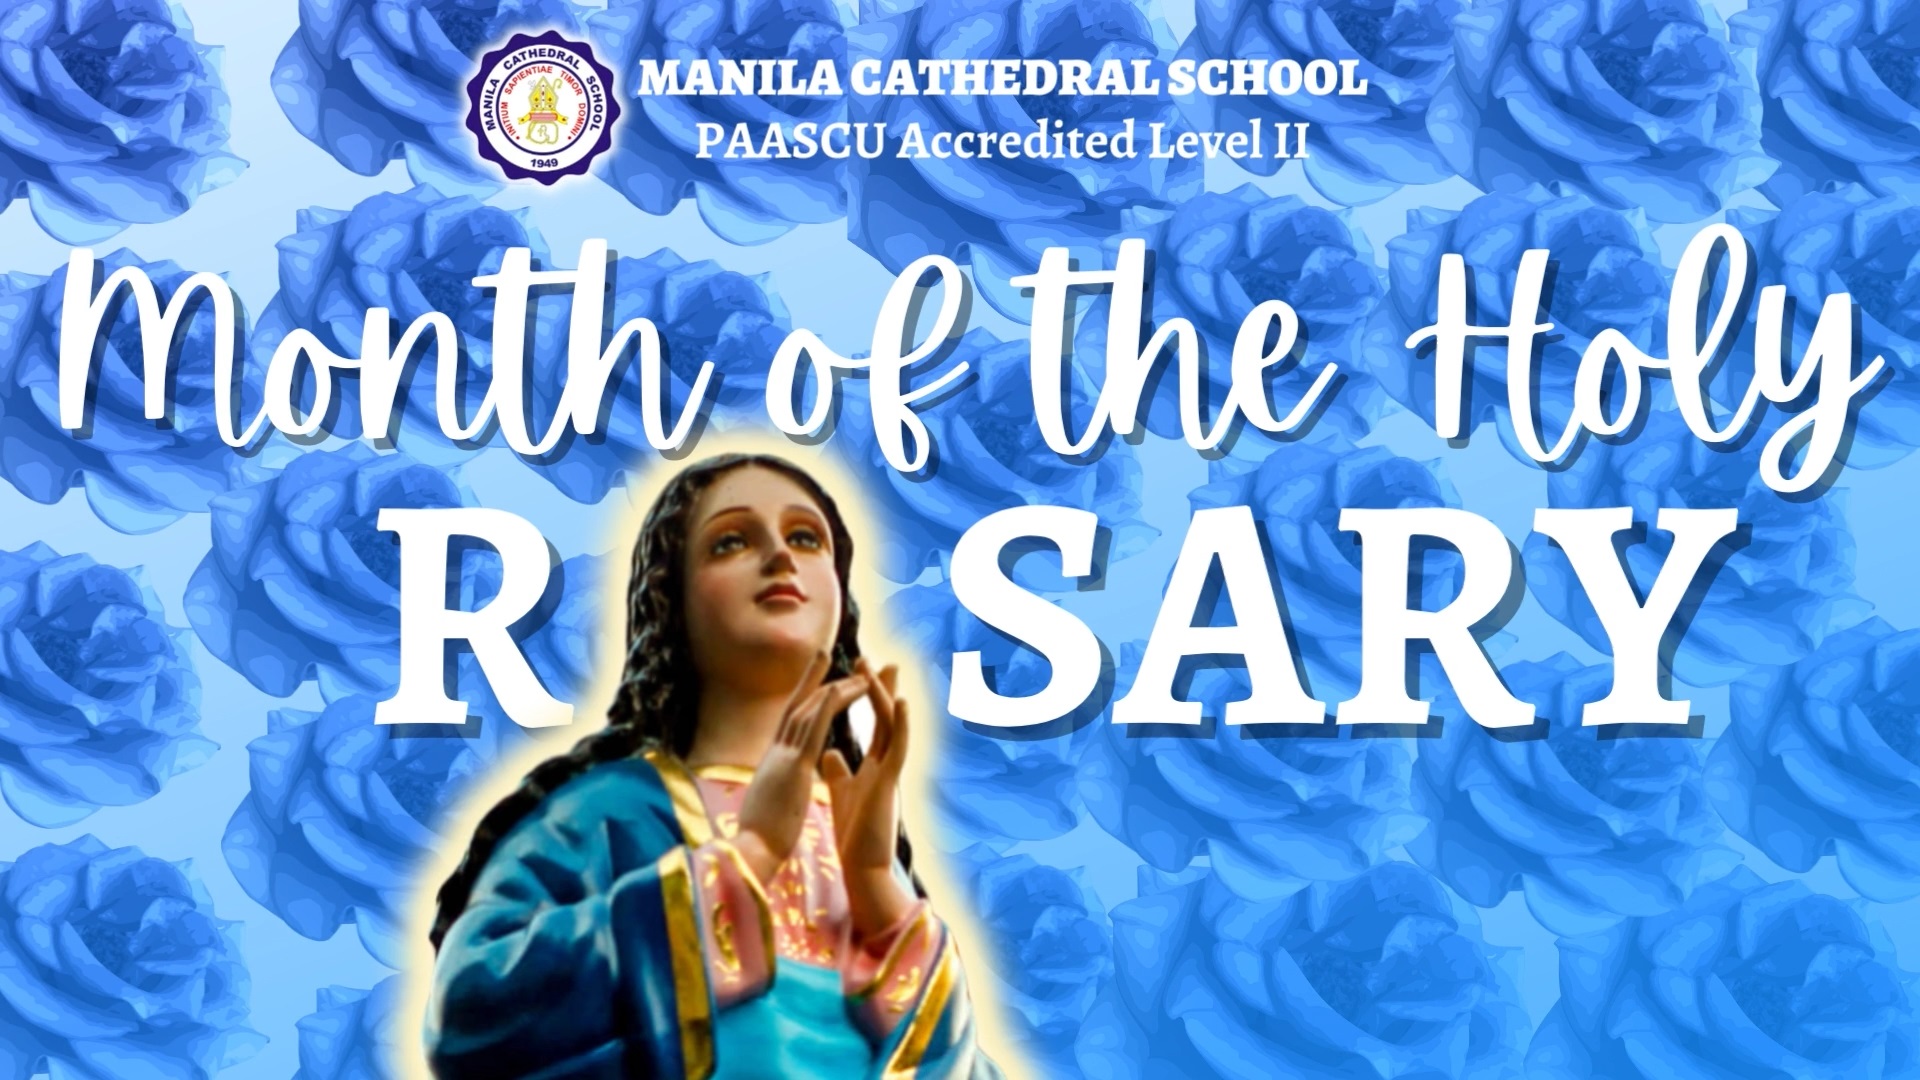 October is the month which the Catholic Church dedicates to the Holy Rosary, a devotion which Our Lady loves most and has asked us to pray frequently, and if possible, daily.  The theme for this year 